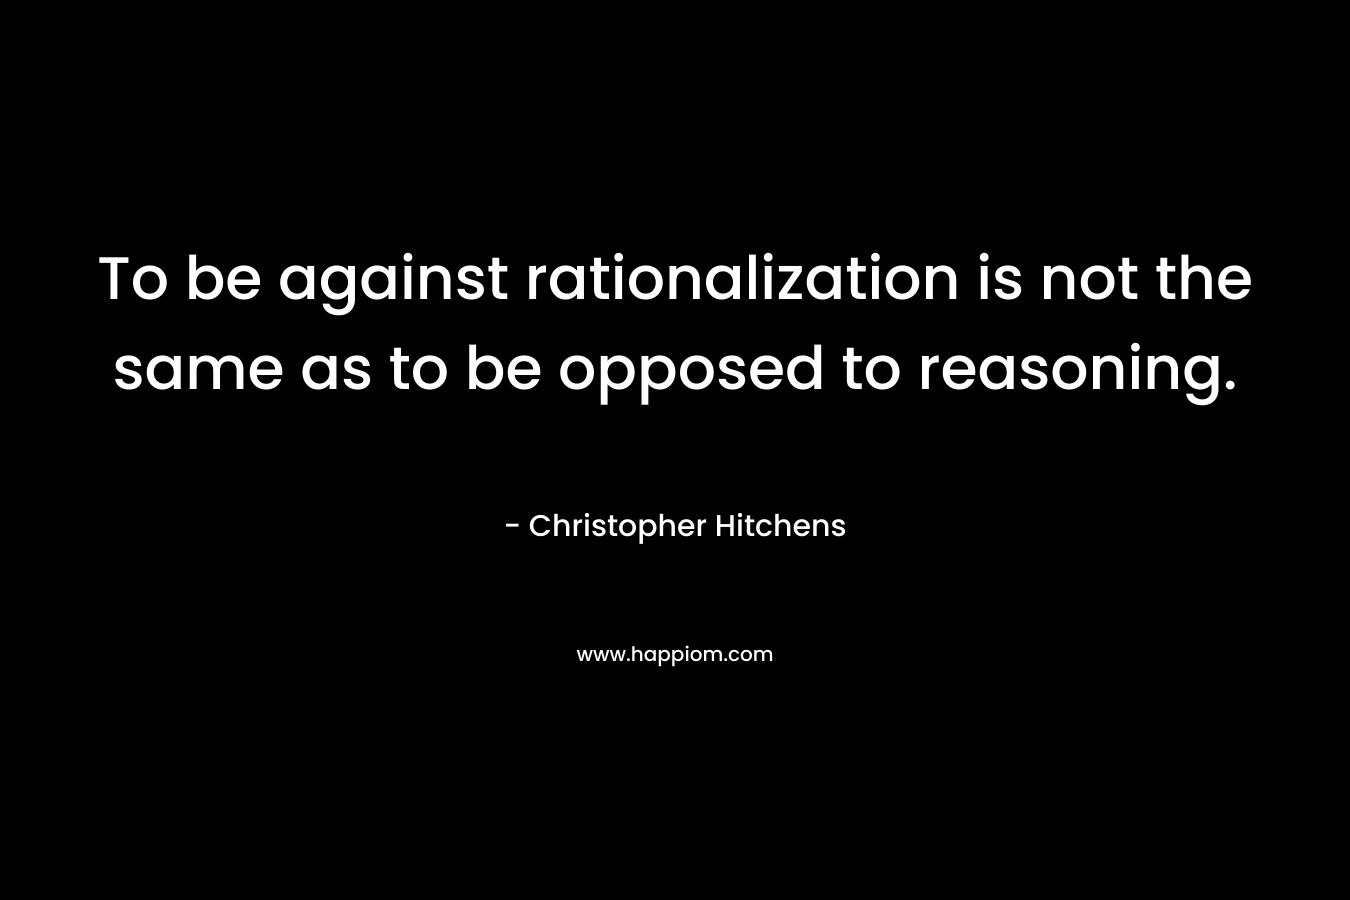 To be against rationalization is not the same as to be opposed to reasoning. – Christopher Hitchens